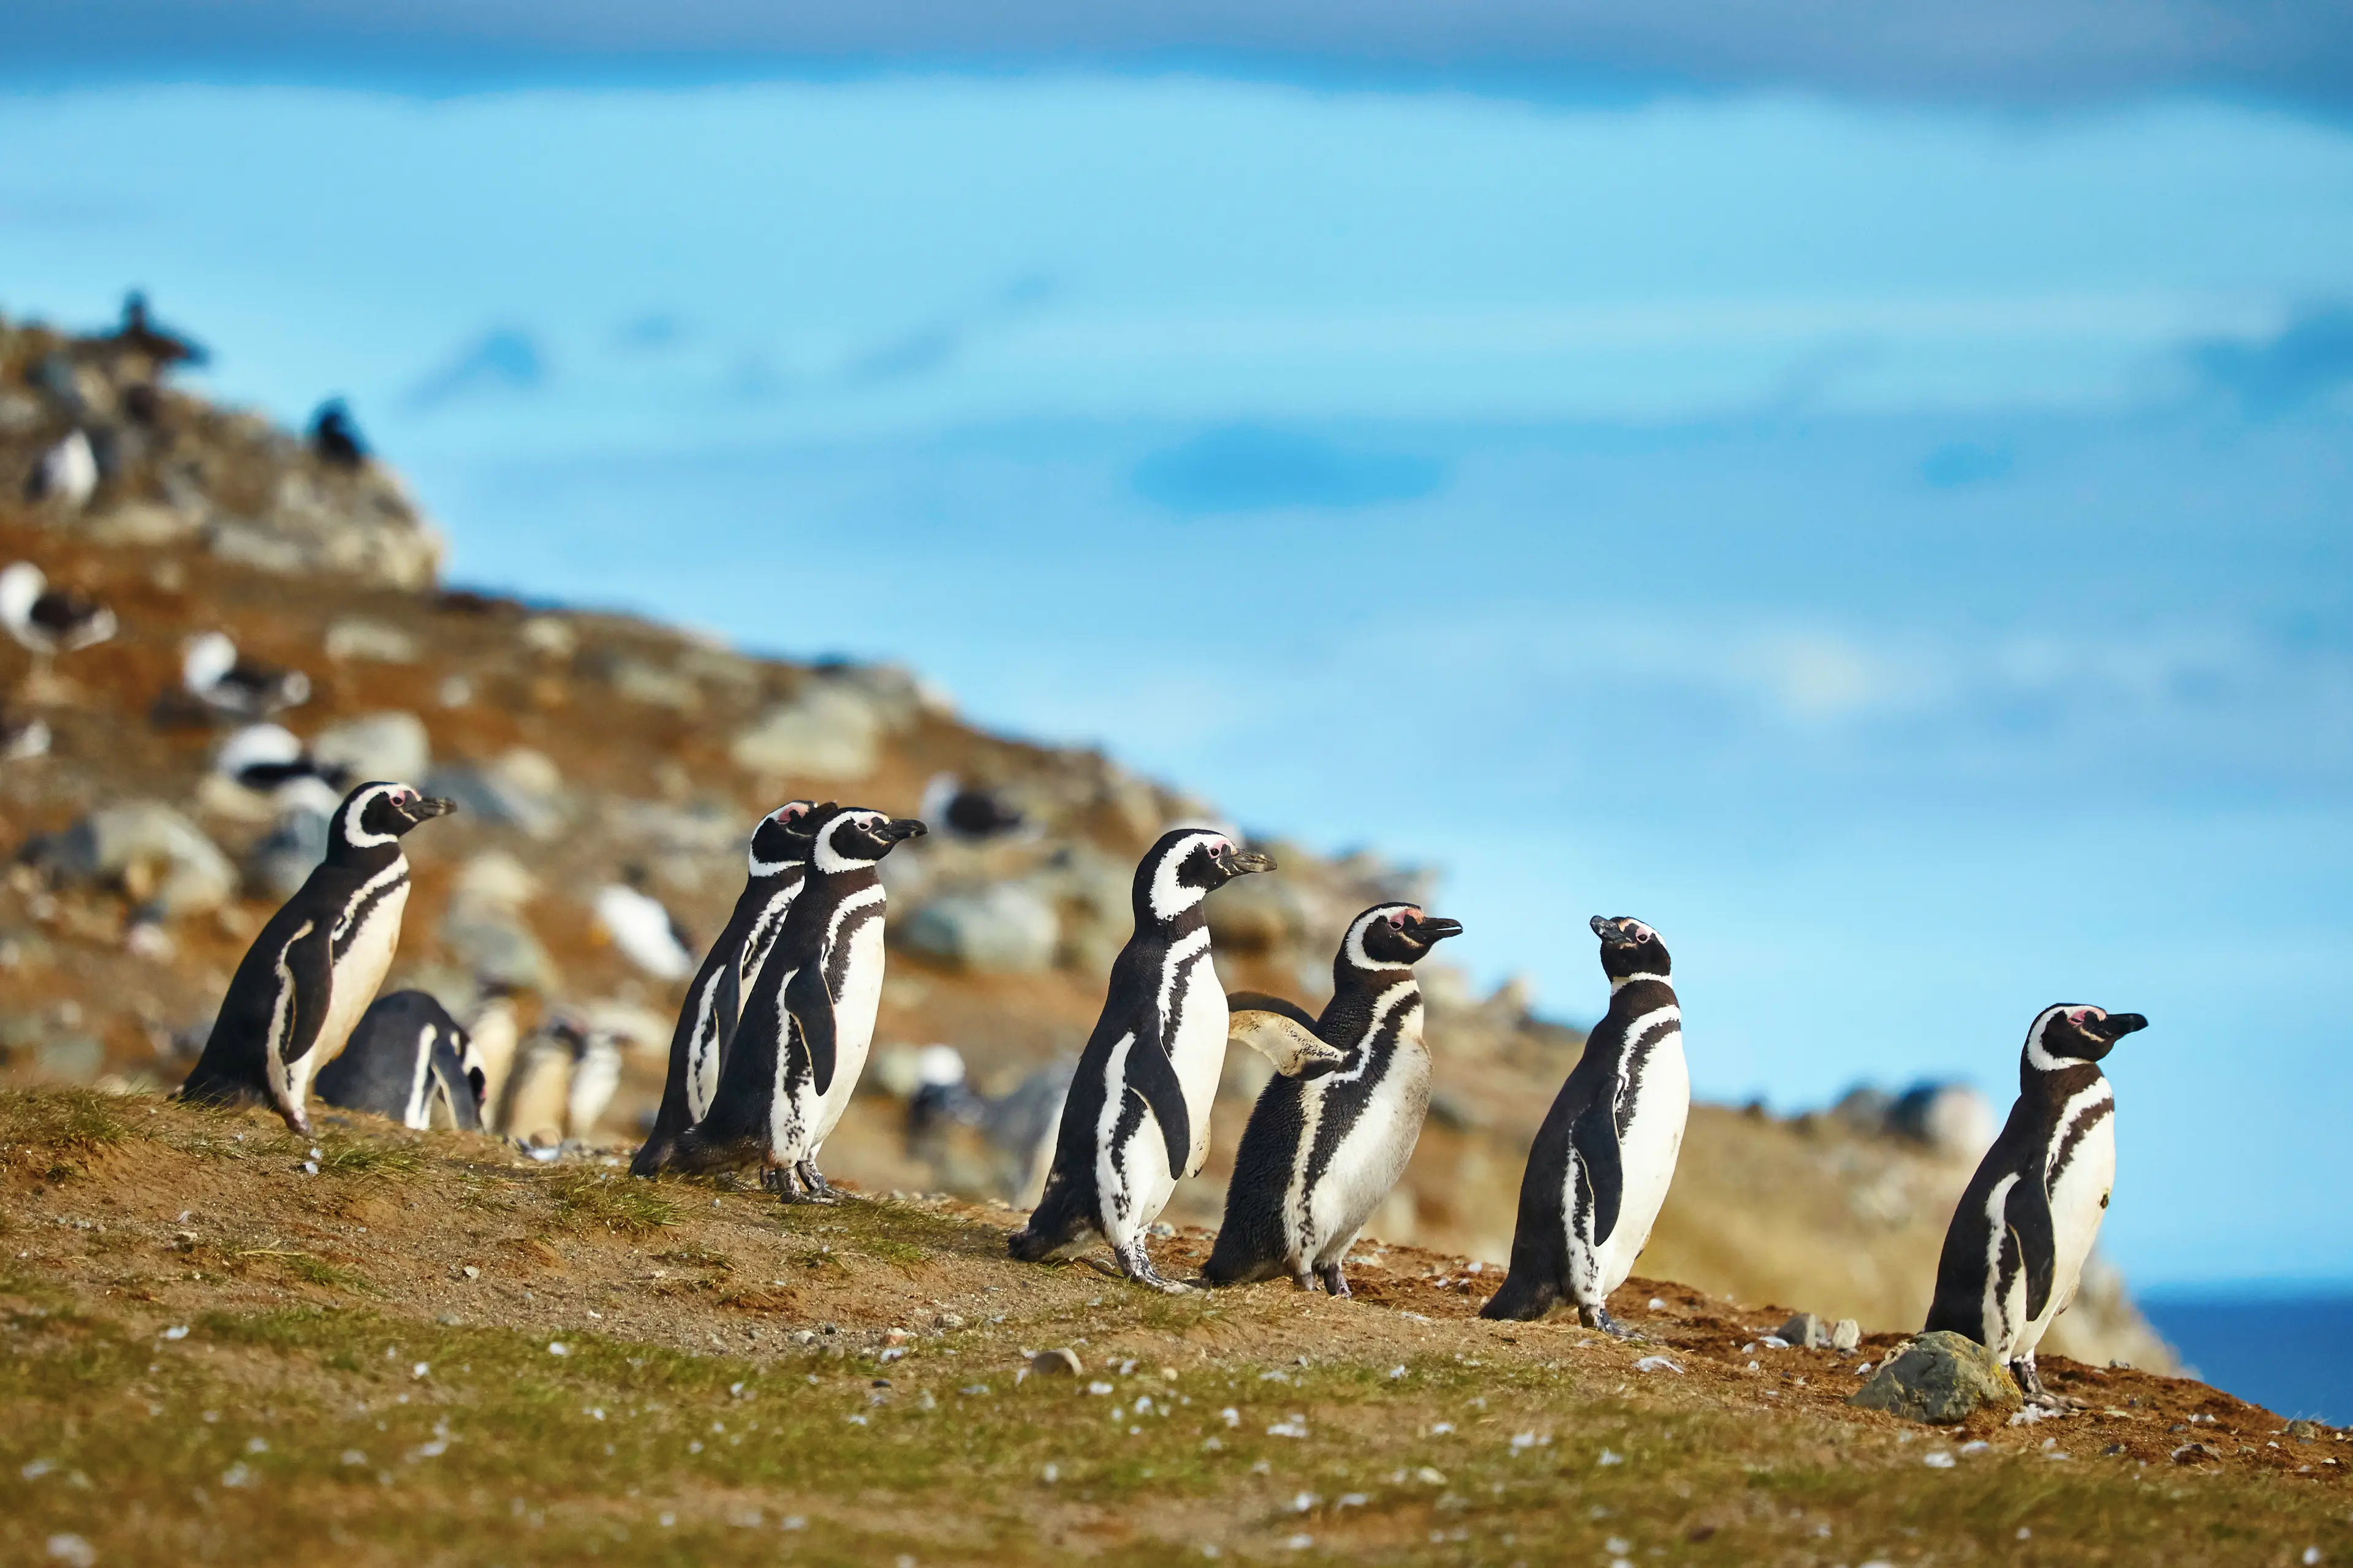 A waddle of wild magellanic penguins